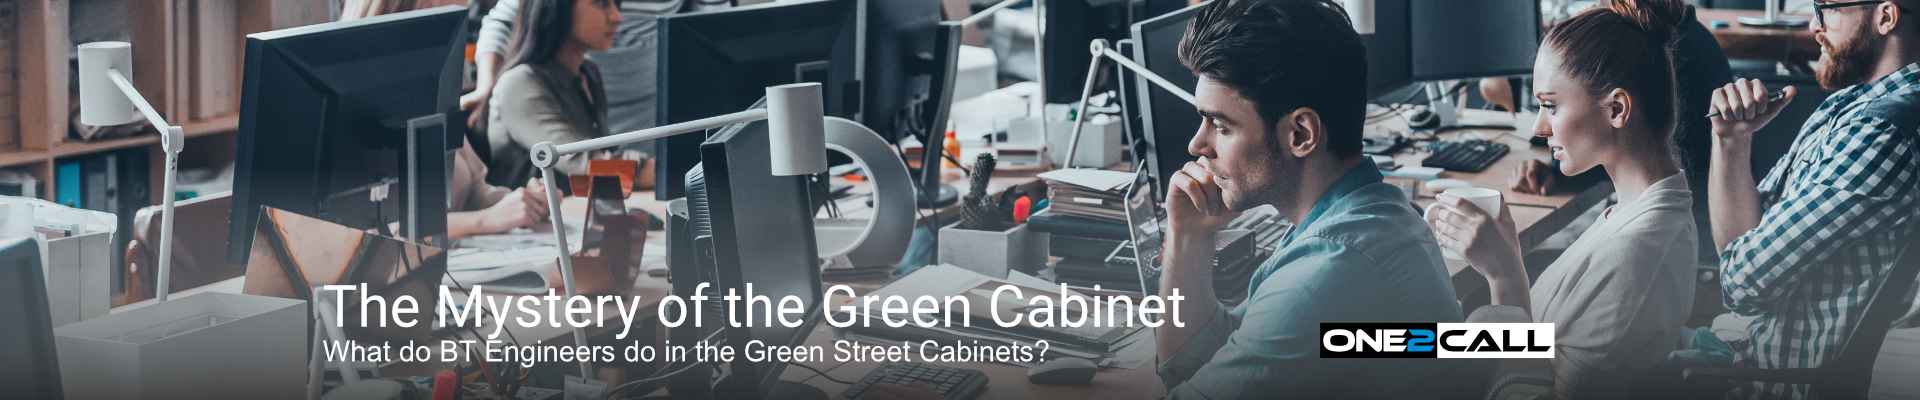 What do BT Engineers do in the Green Street Cabinets?